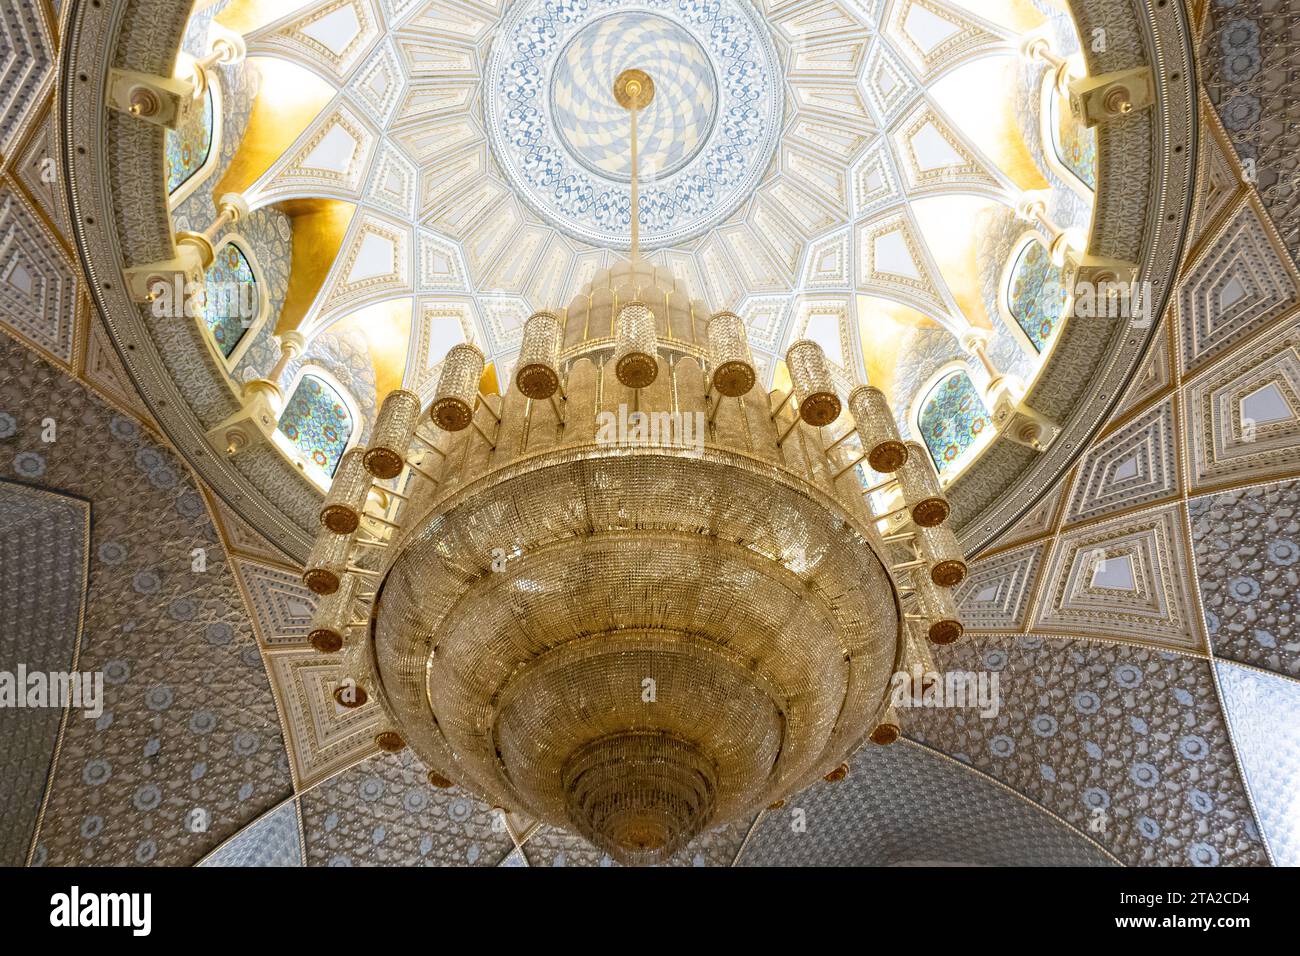 Abu Dhabi, UAE, 08.02.2020. UAE Presidential Palace Qasr Al Watan, view of the biggest, priceless chandelier with 350,000 pieces of crystal. Stock Photo